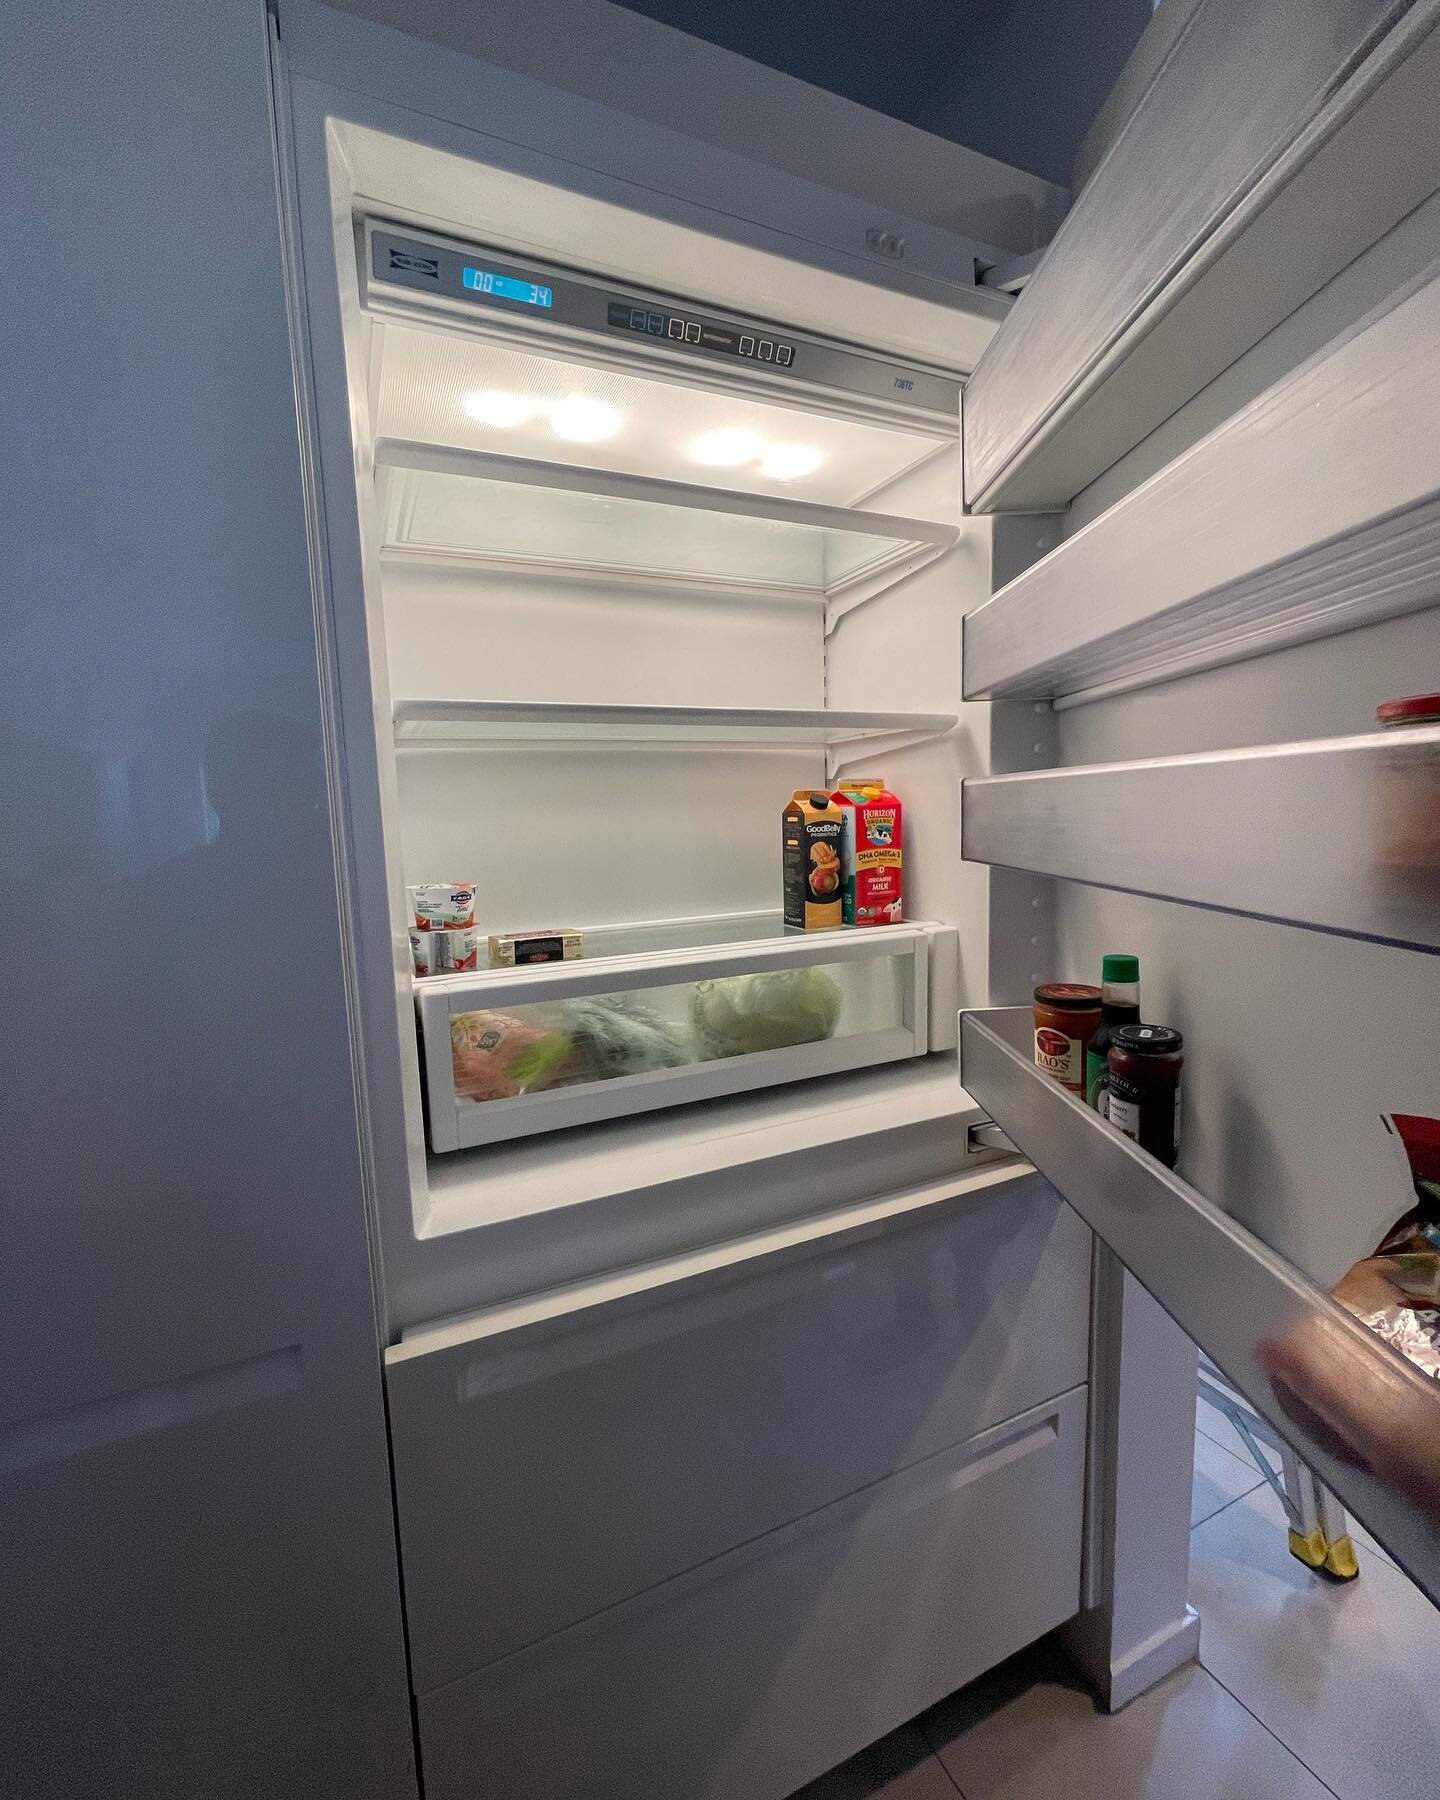 Regular maintenance for Sub-Zero refrigerator, to prevent any kind of problems!